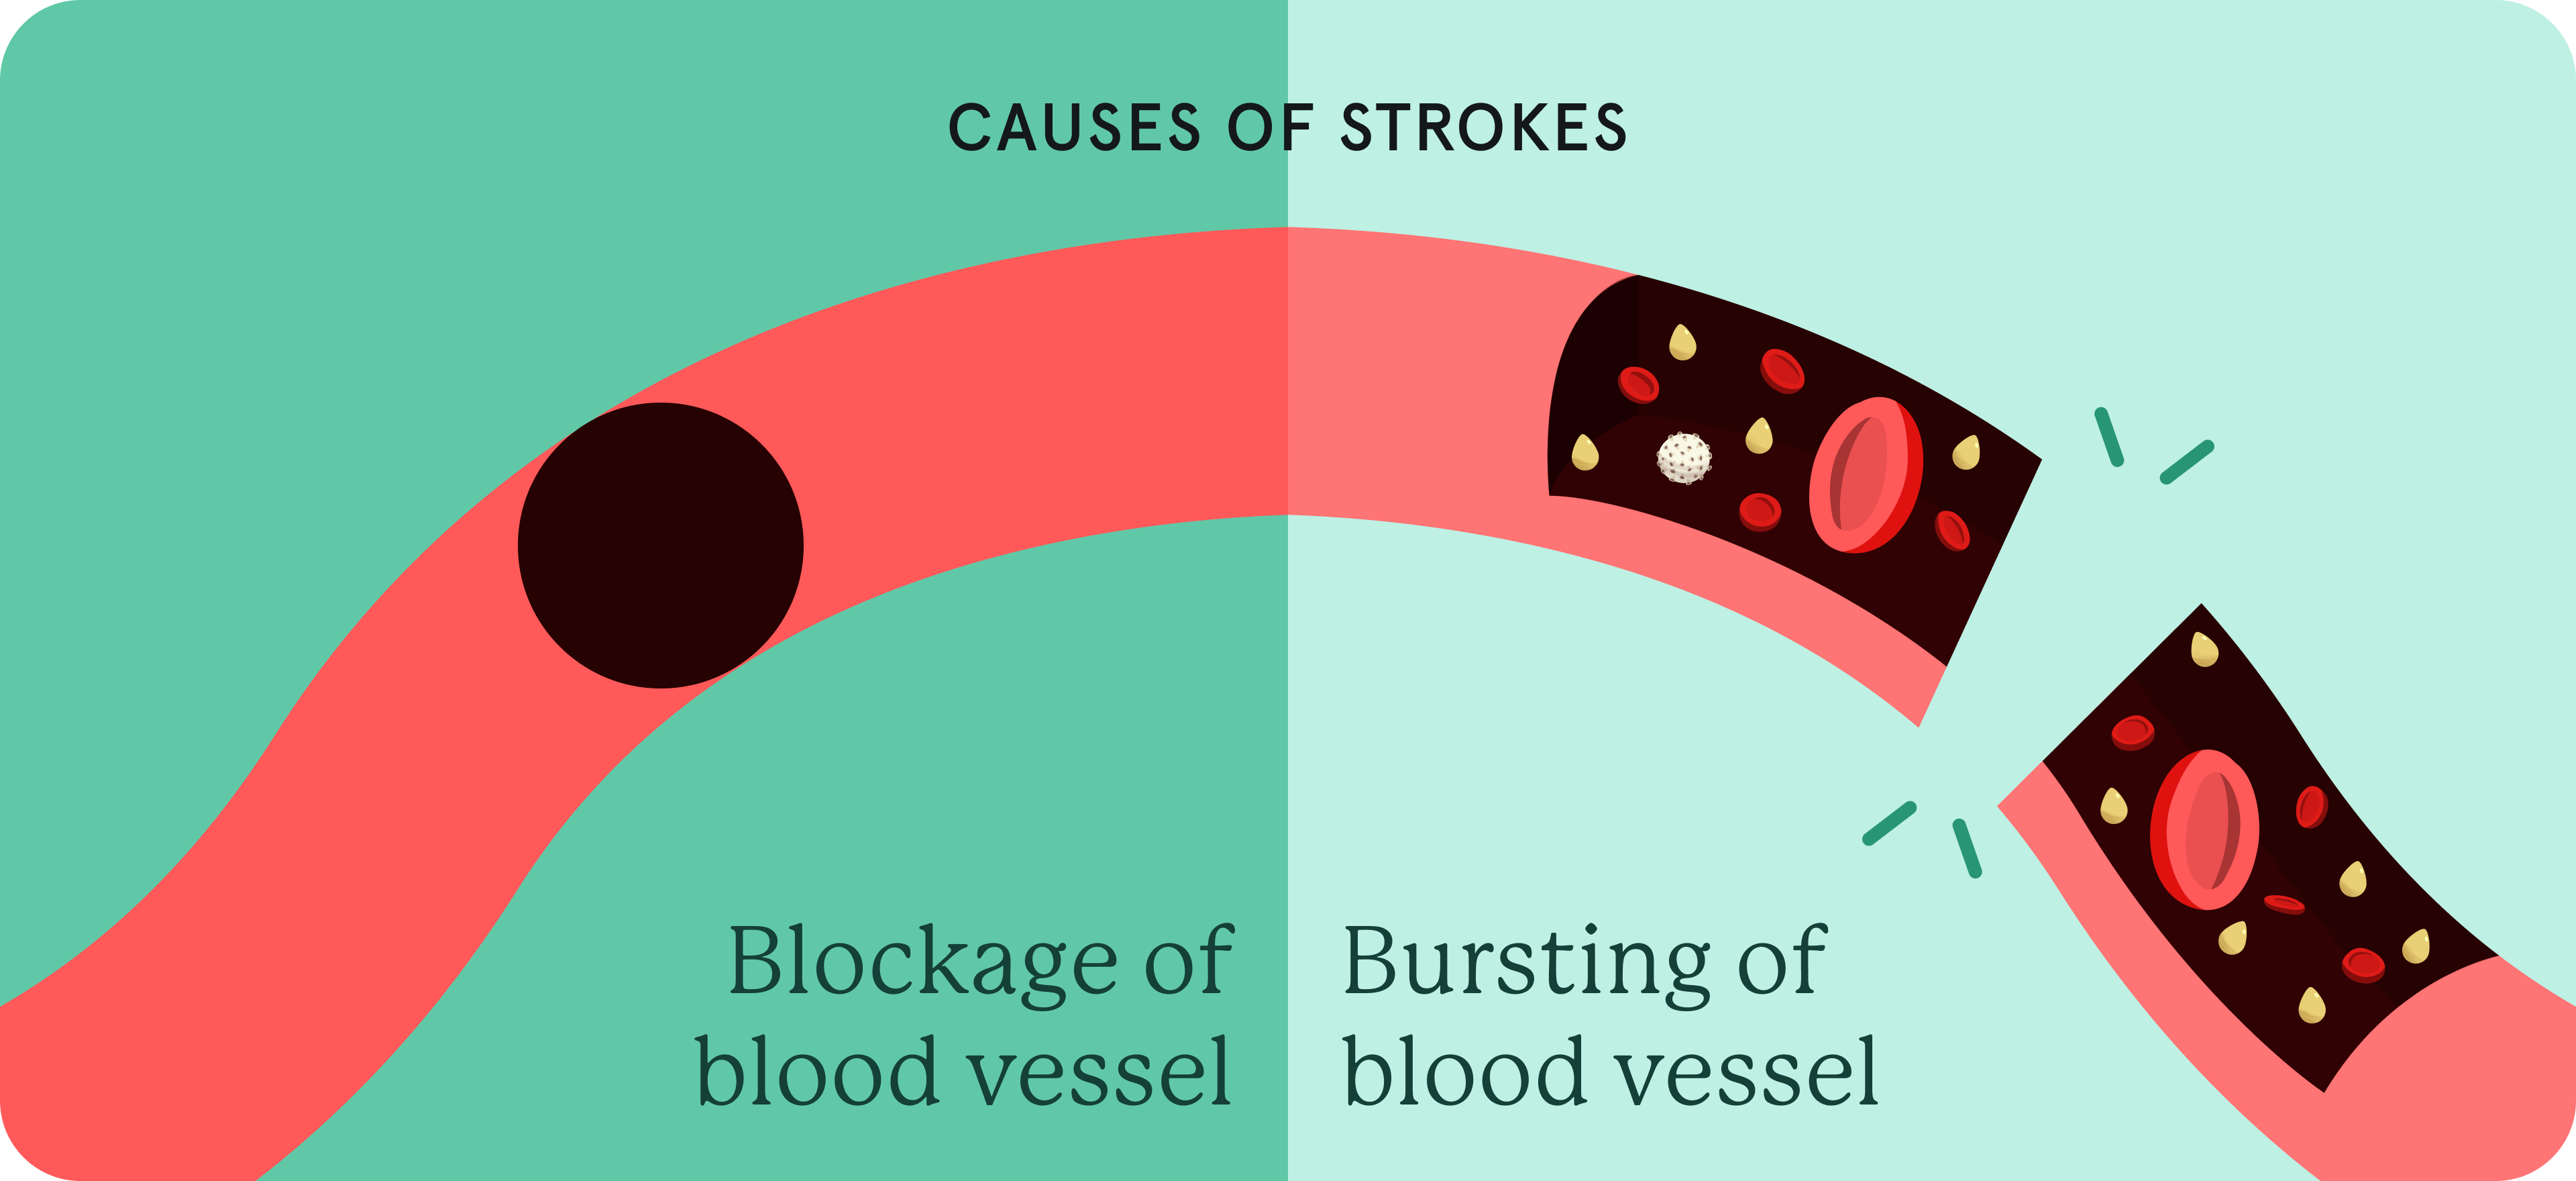 A pictorial representation of the causes of stroke